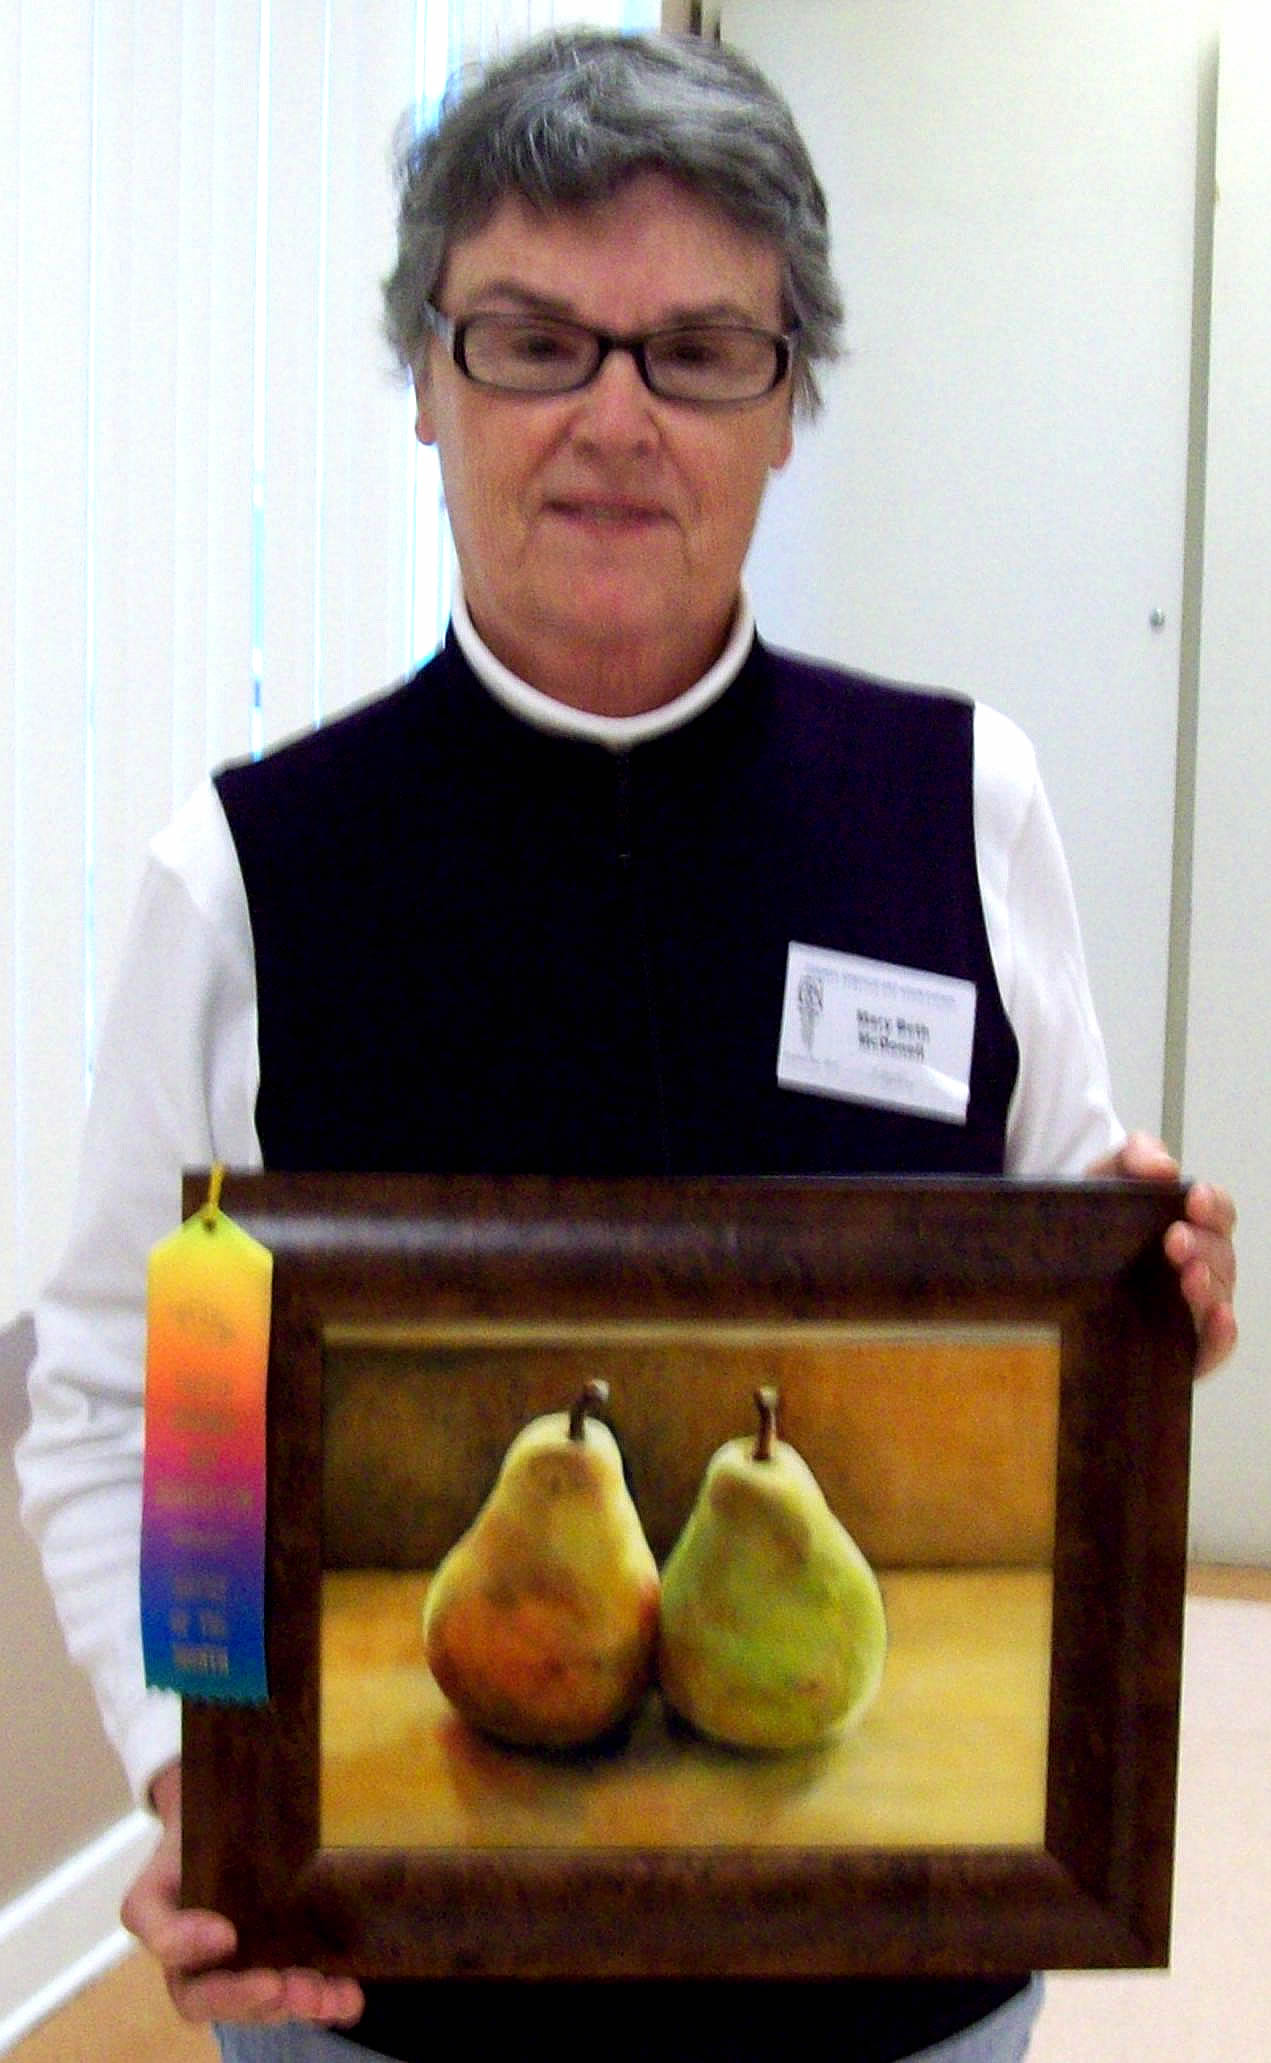 Mary Beth with Oil Painting of Pears